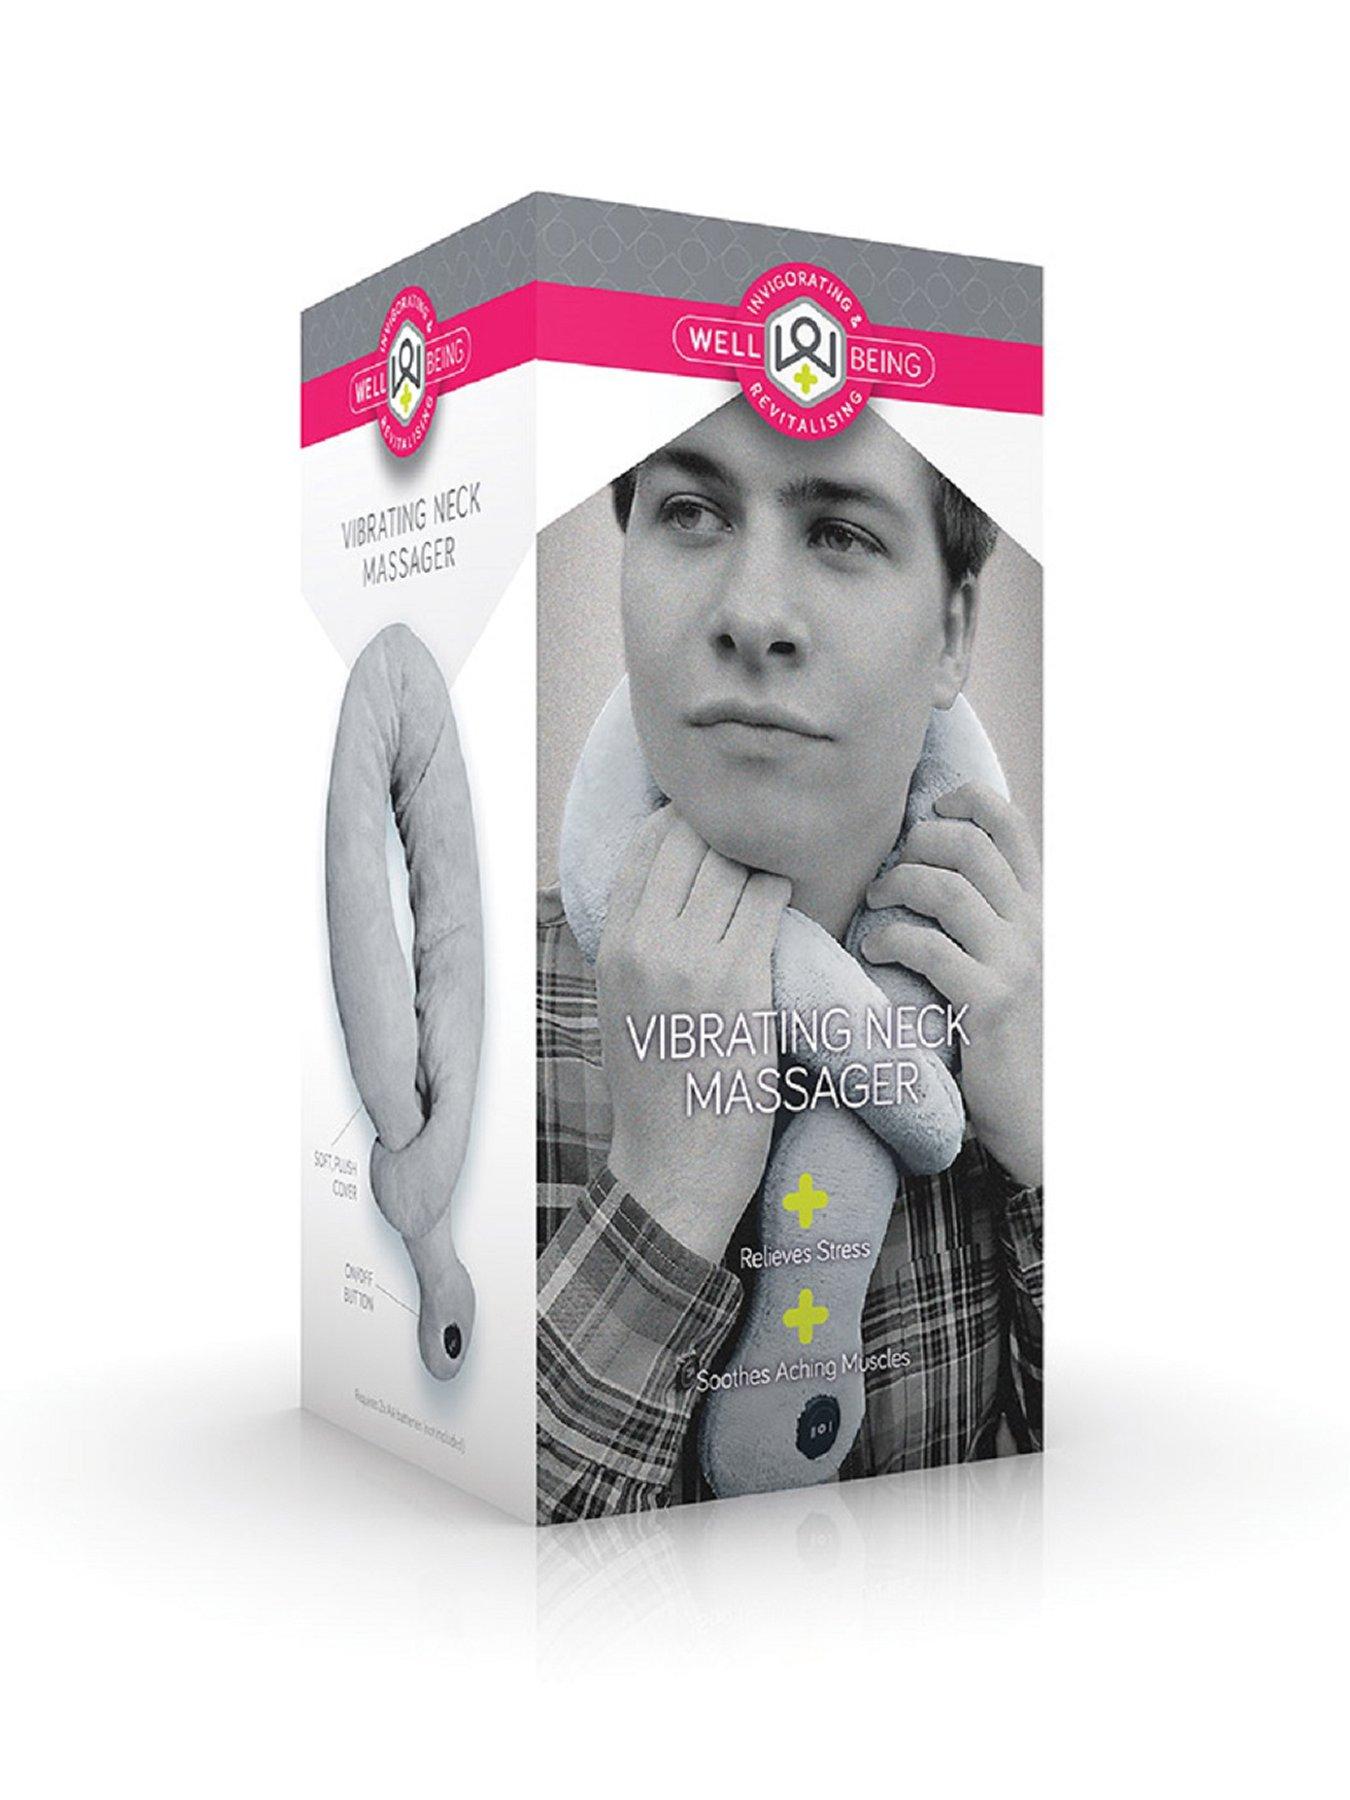 The Source Vibrating Neck Massager